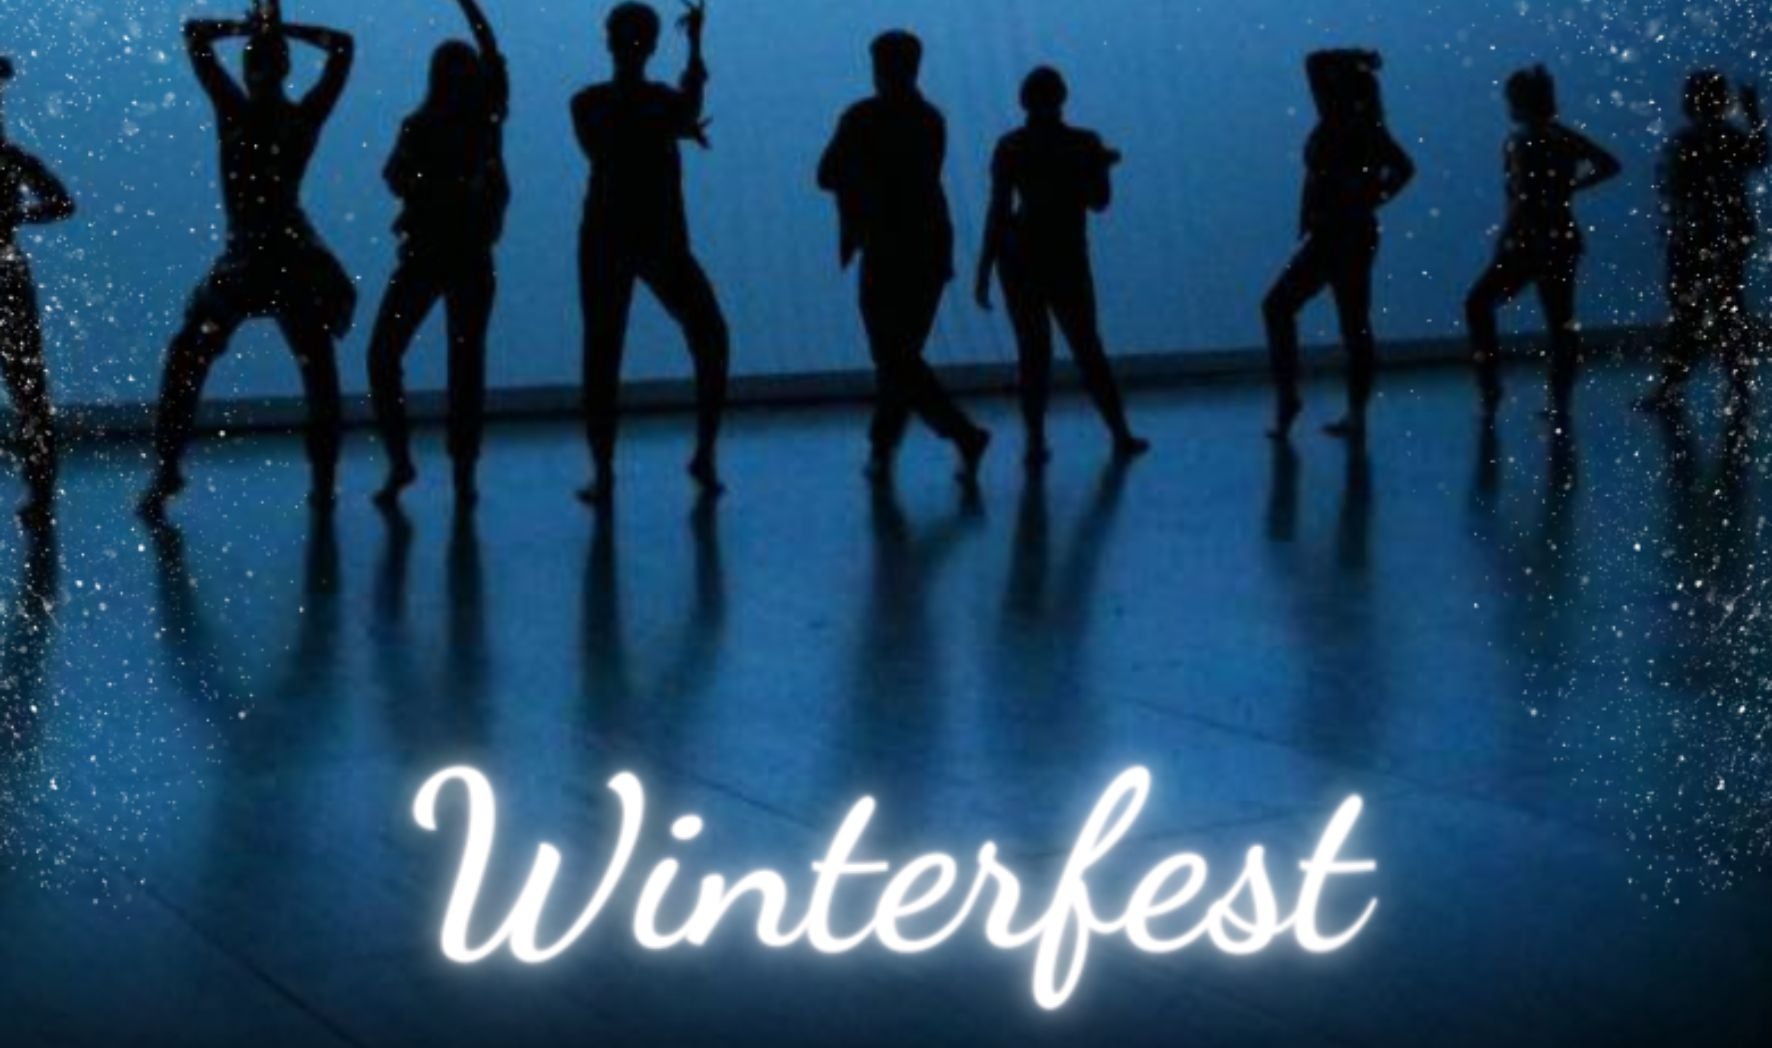 More Info for Winterfest